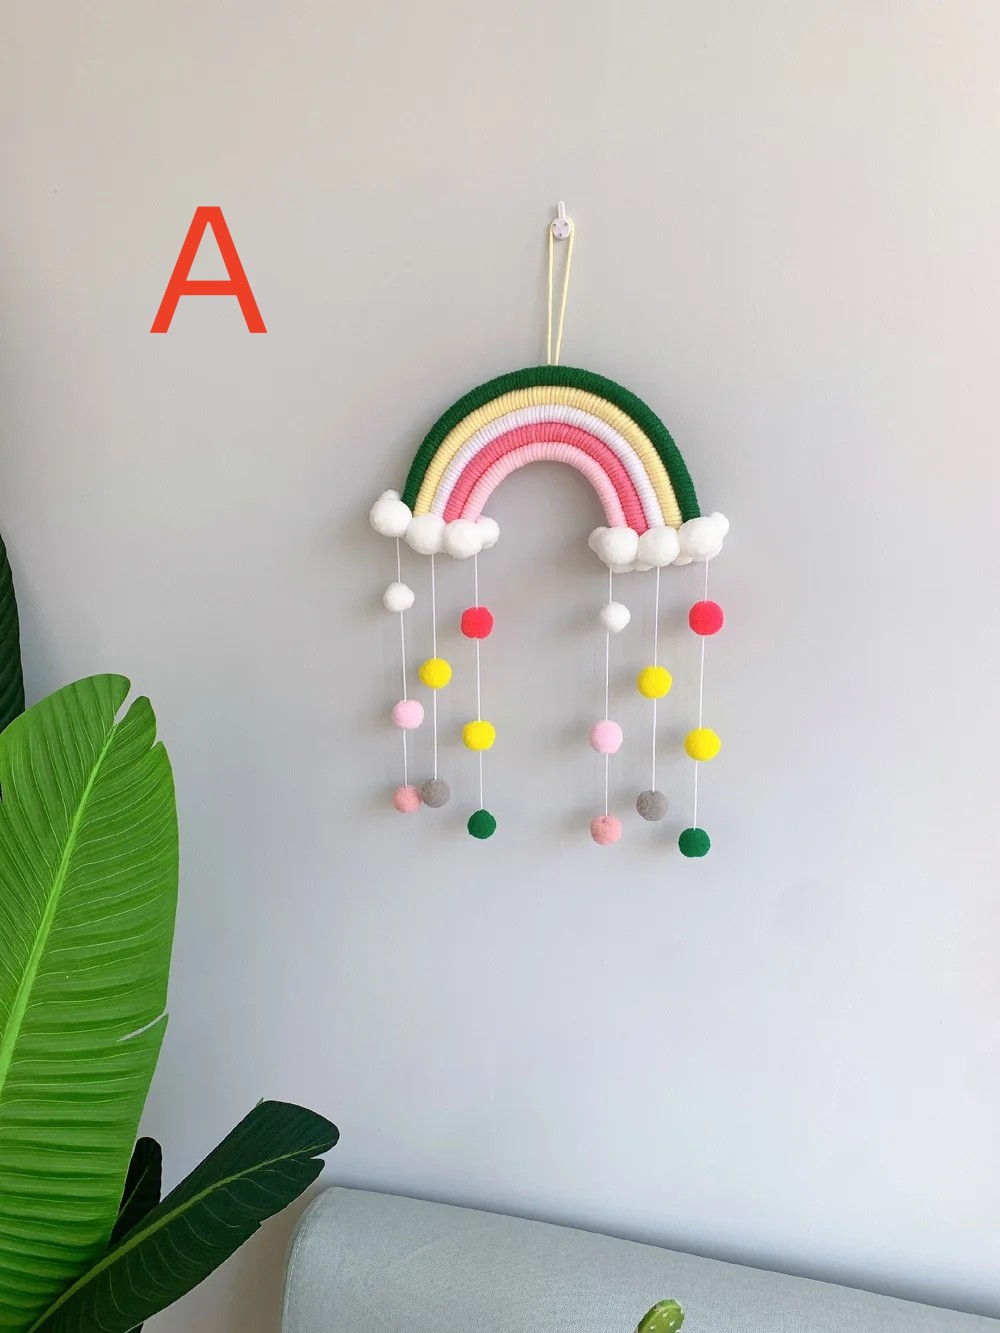 Ins Style Rainbow Clouds Tapestry, Felt Ball, Macrame Wall Hanging Decor, Kids Room Hanging Ornament, Balcony Home Wall Decor